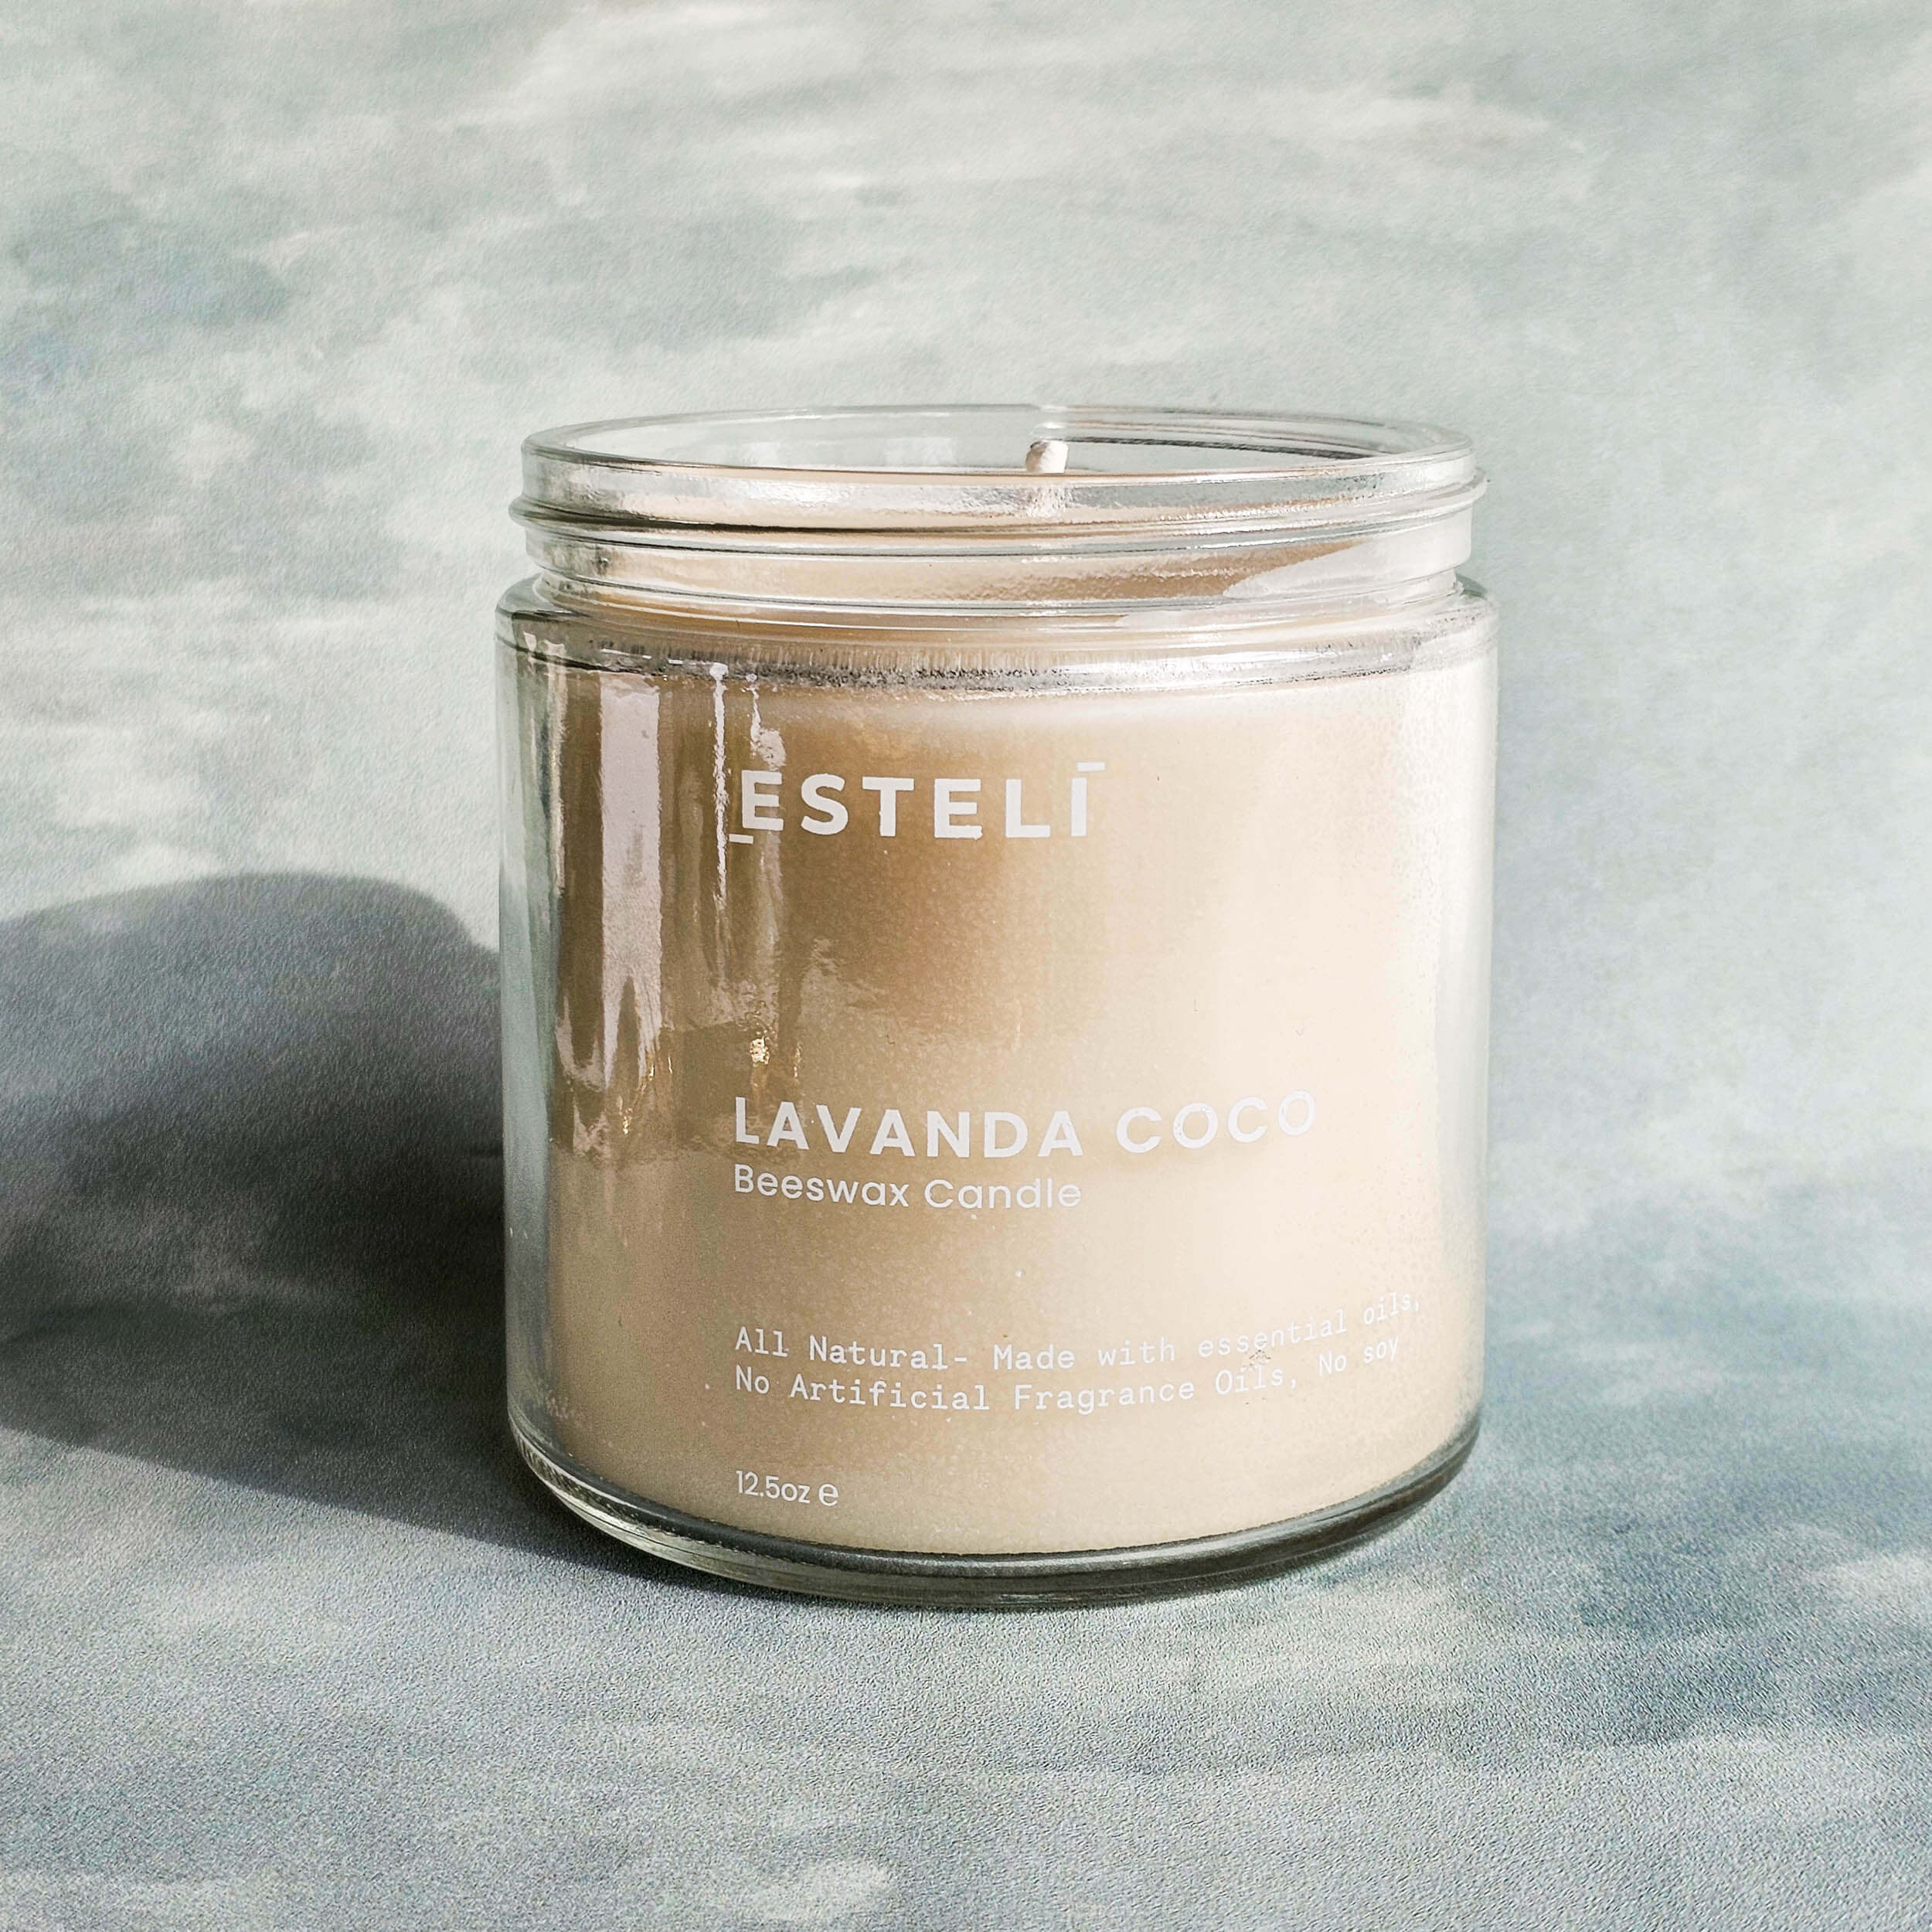 Lava: Premium Scented Candle Made With Natural Coconut Wax